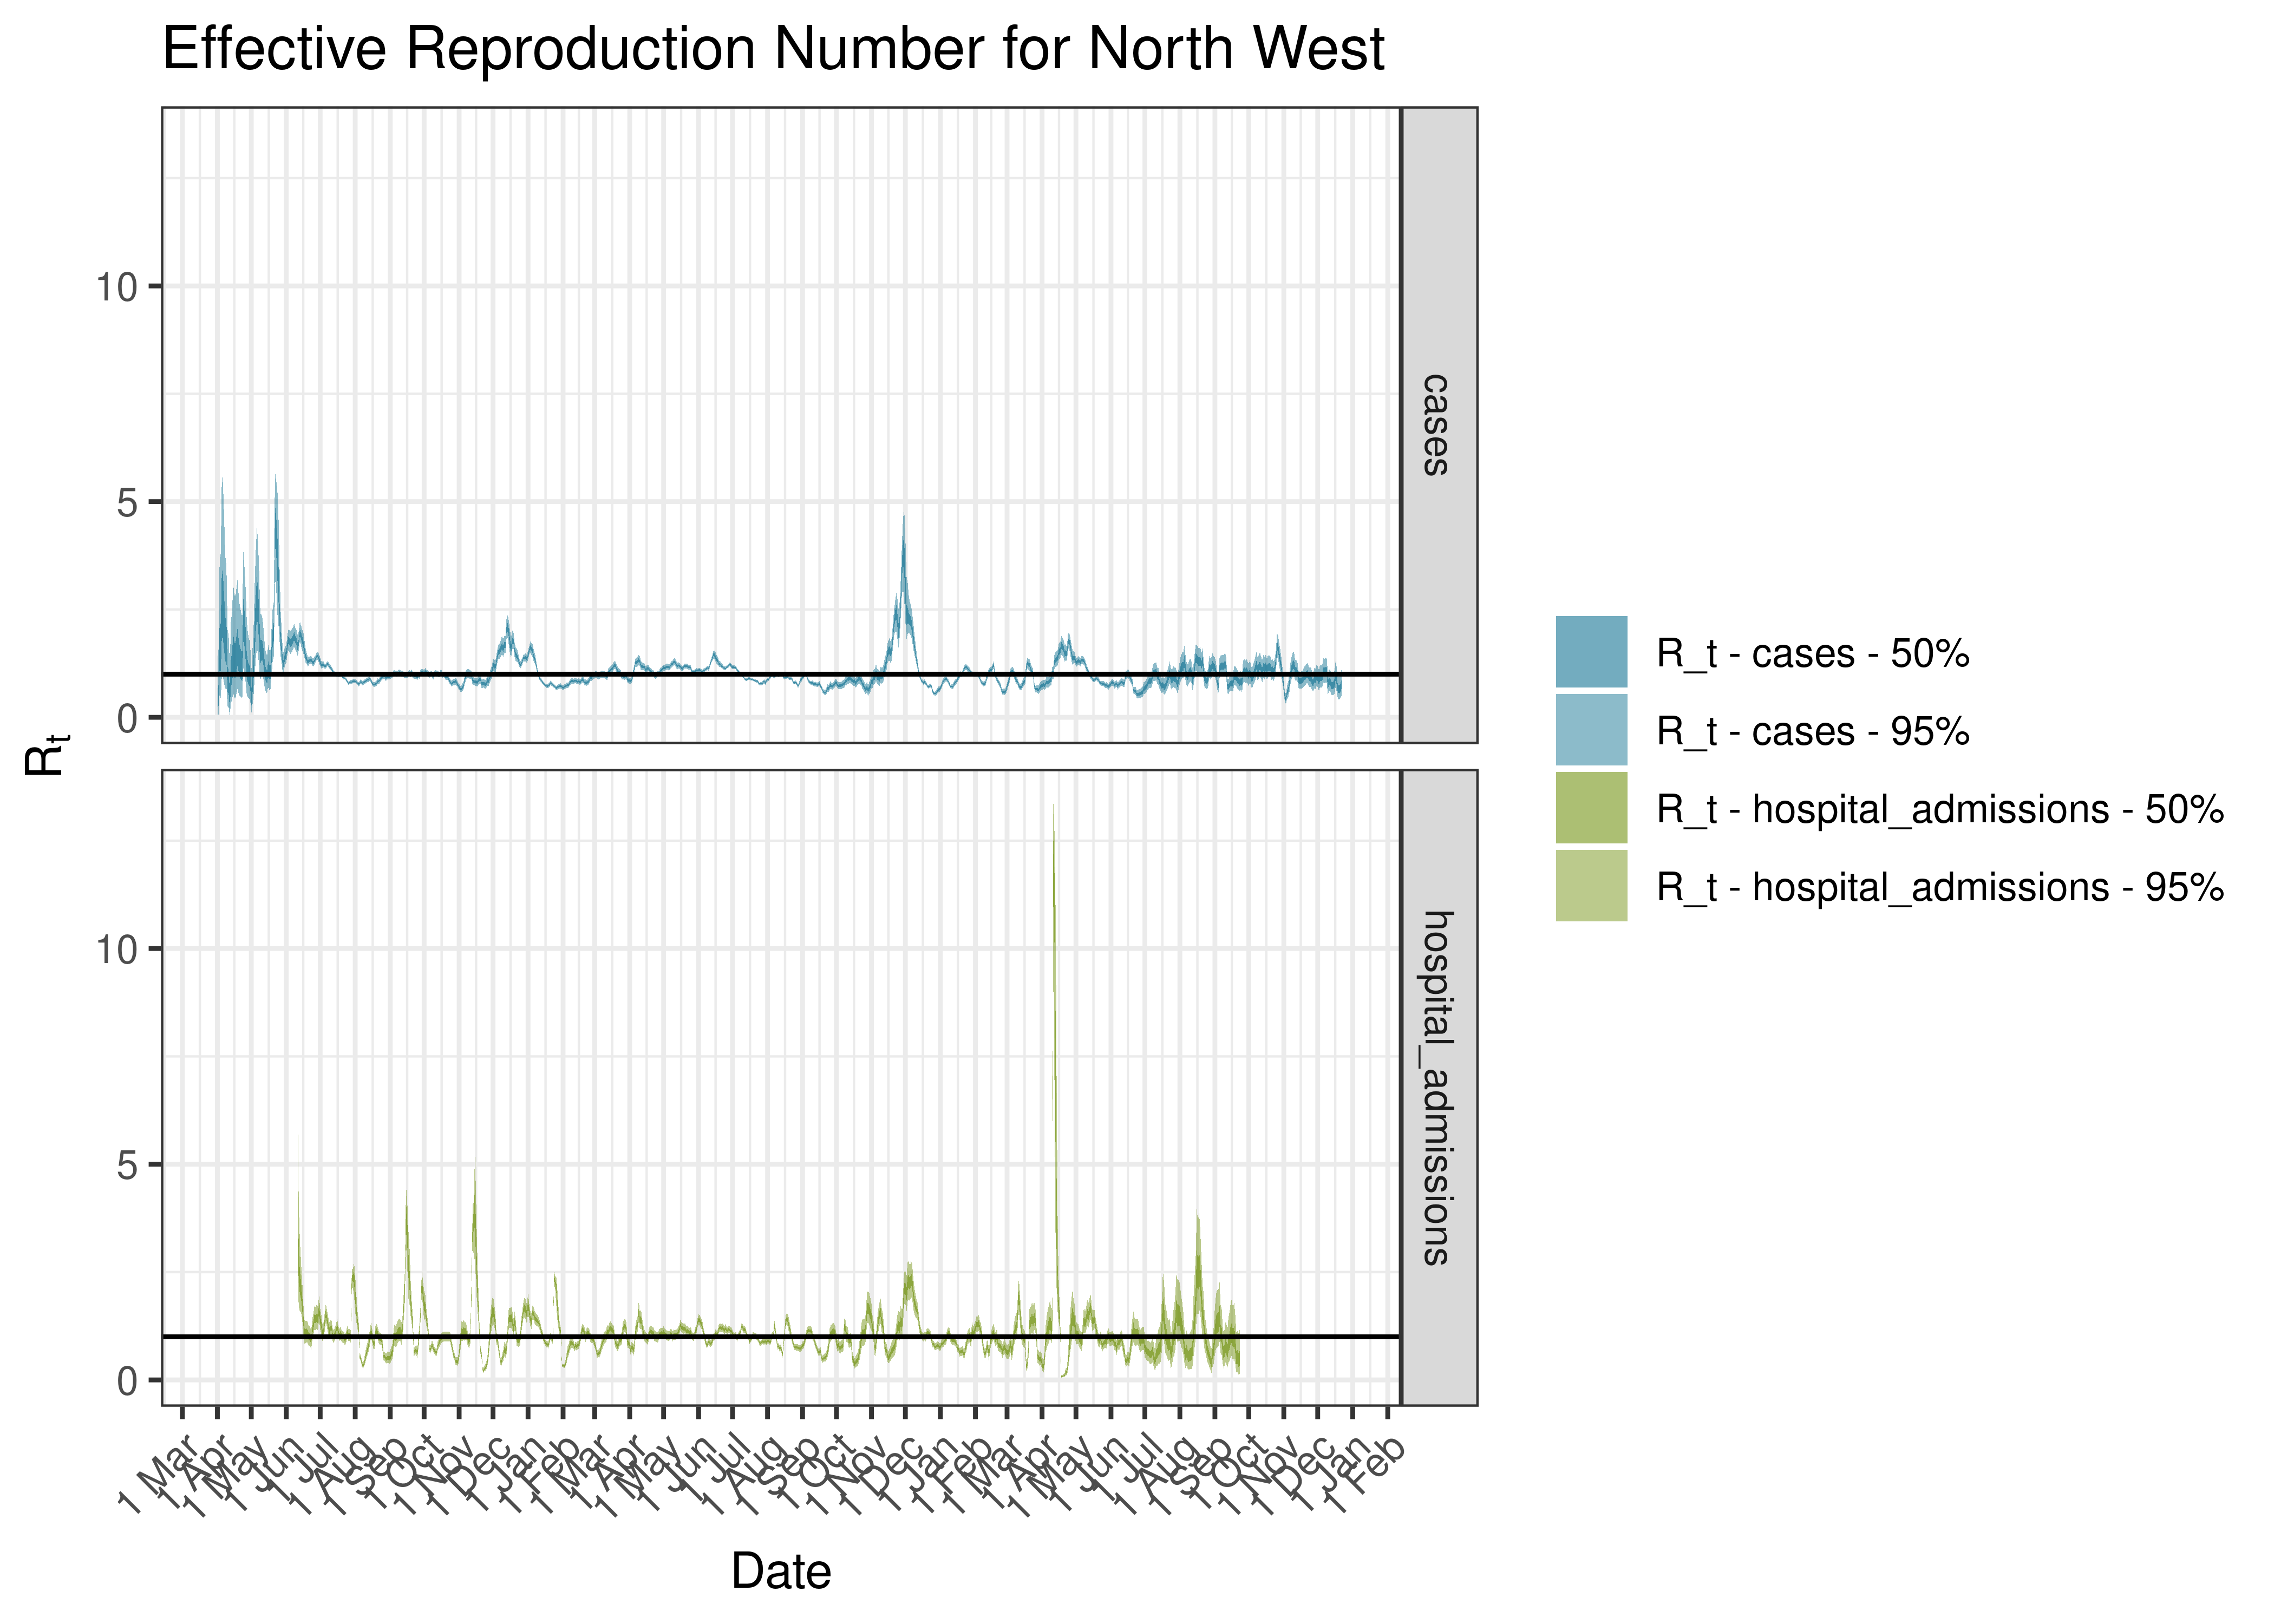 Estimated Effective Reproduction Number for North West since 1 April 2020